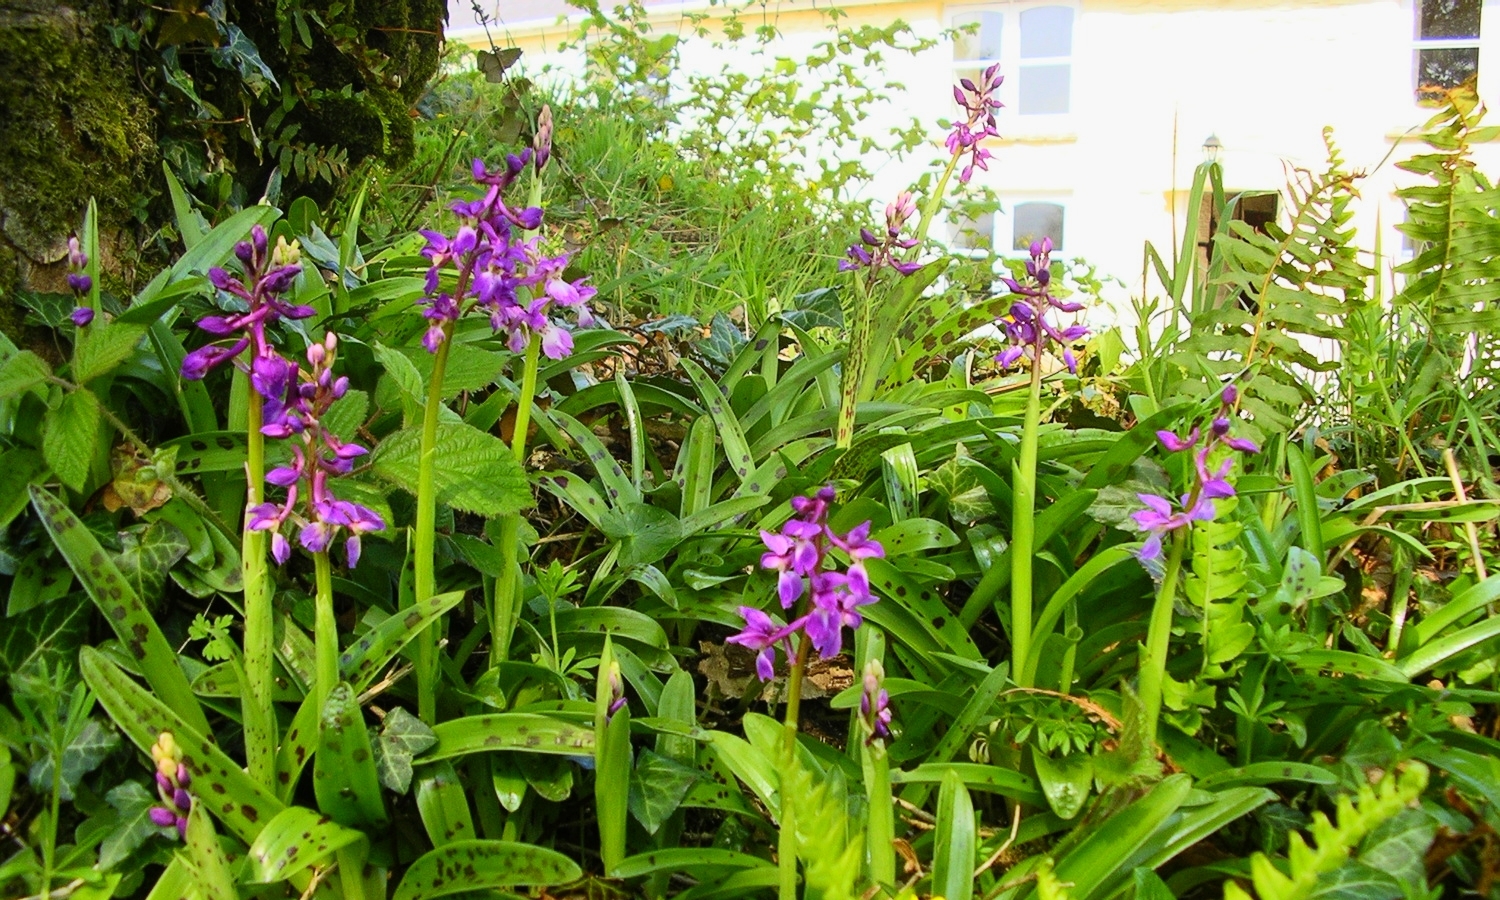 Wild orchids in May